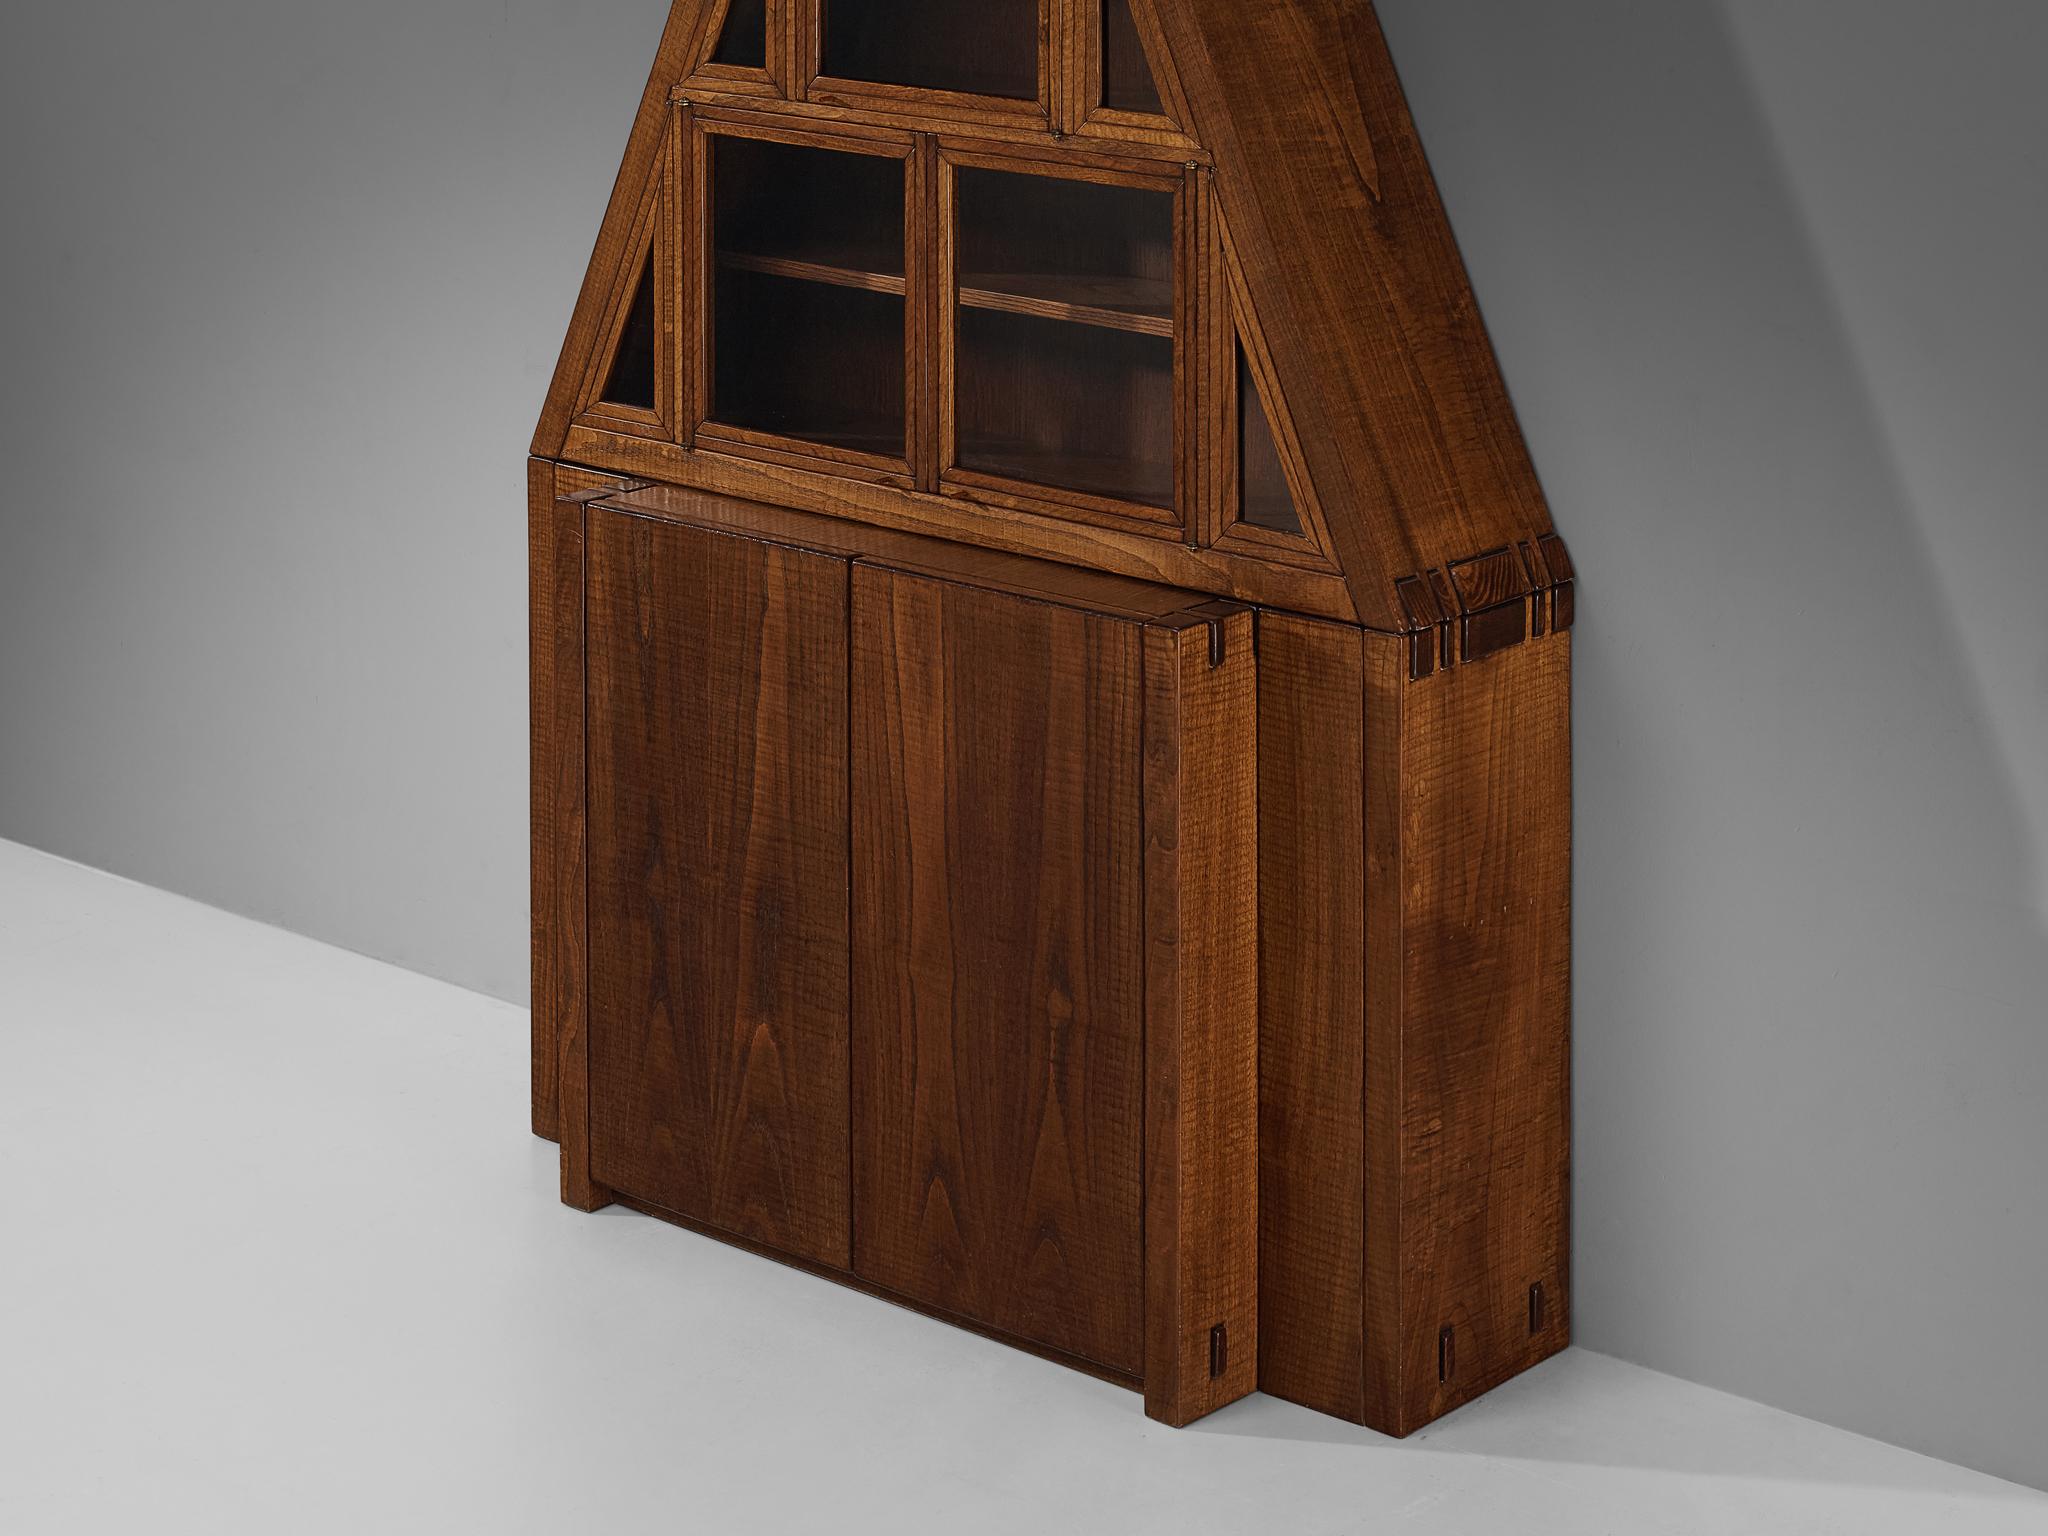 Giuseppe Rivadossi Pyramid Shaped Cabinet in Chestnut 8.2 feet